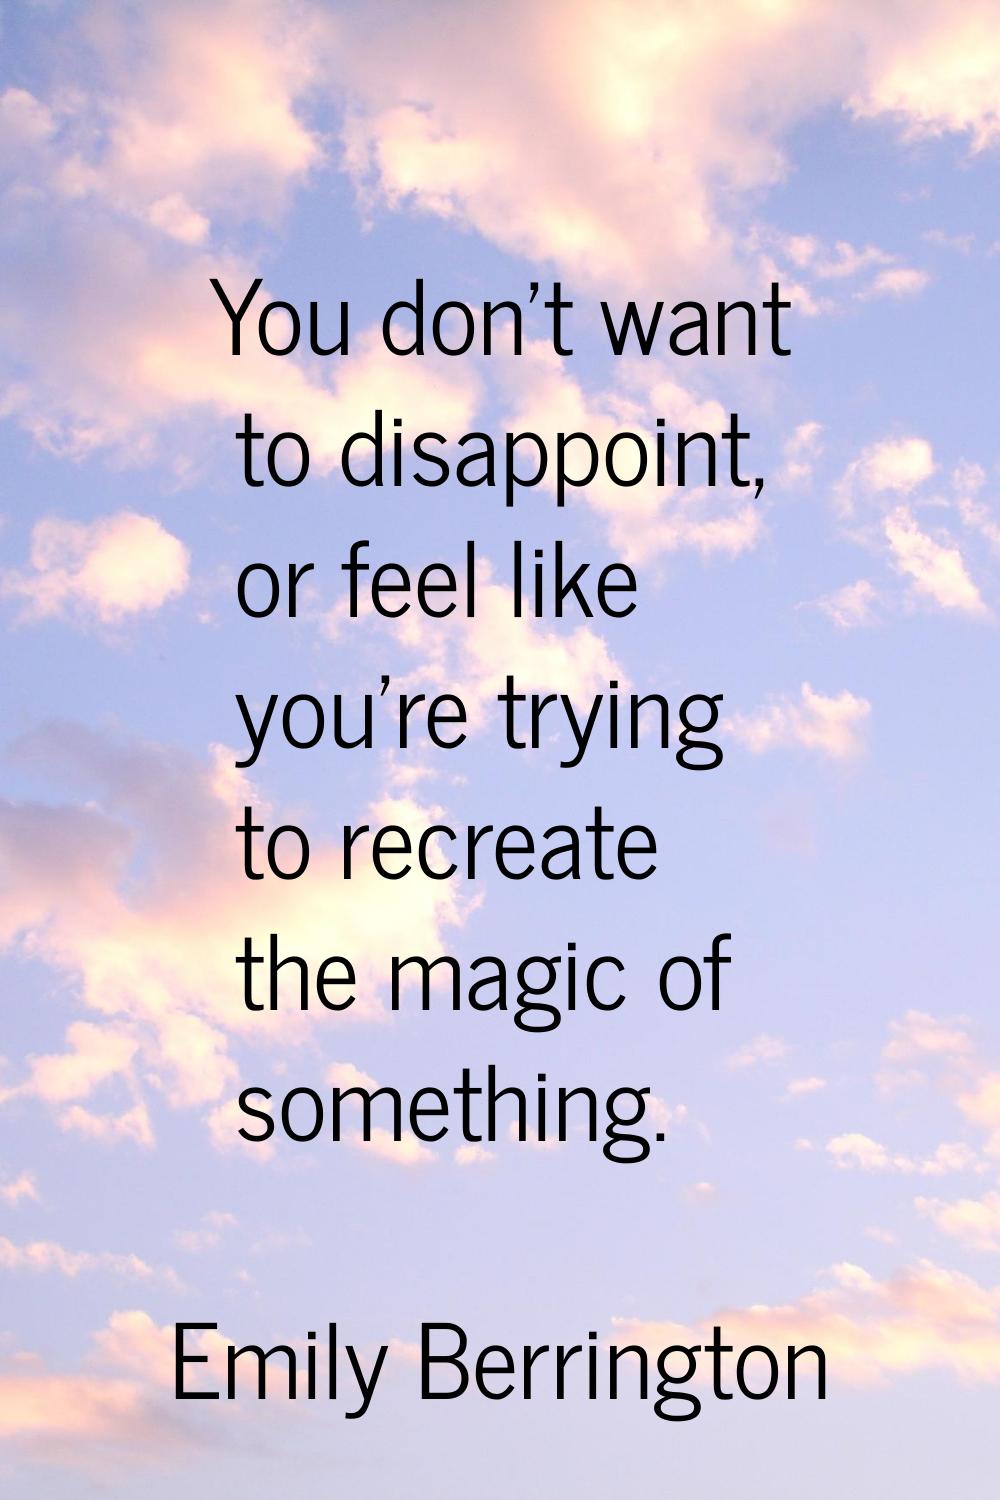 You don't want to disappoint, or feel like you're trying to recreate the magic of something.